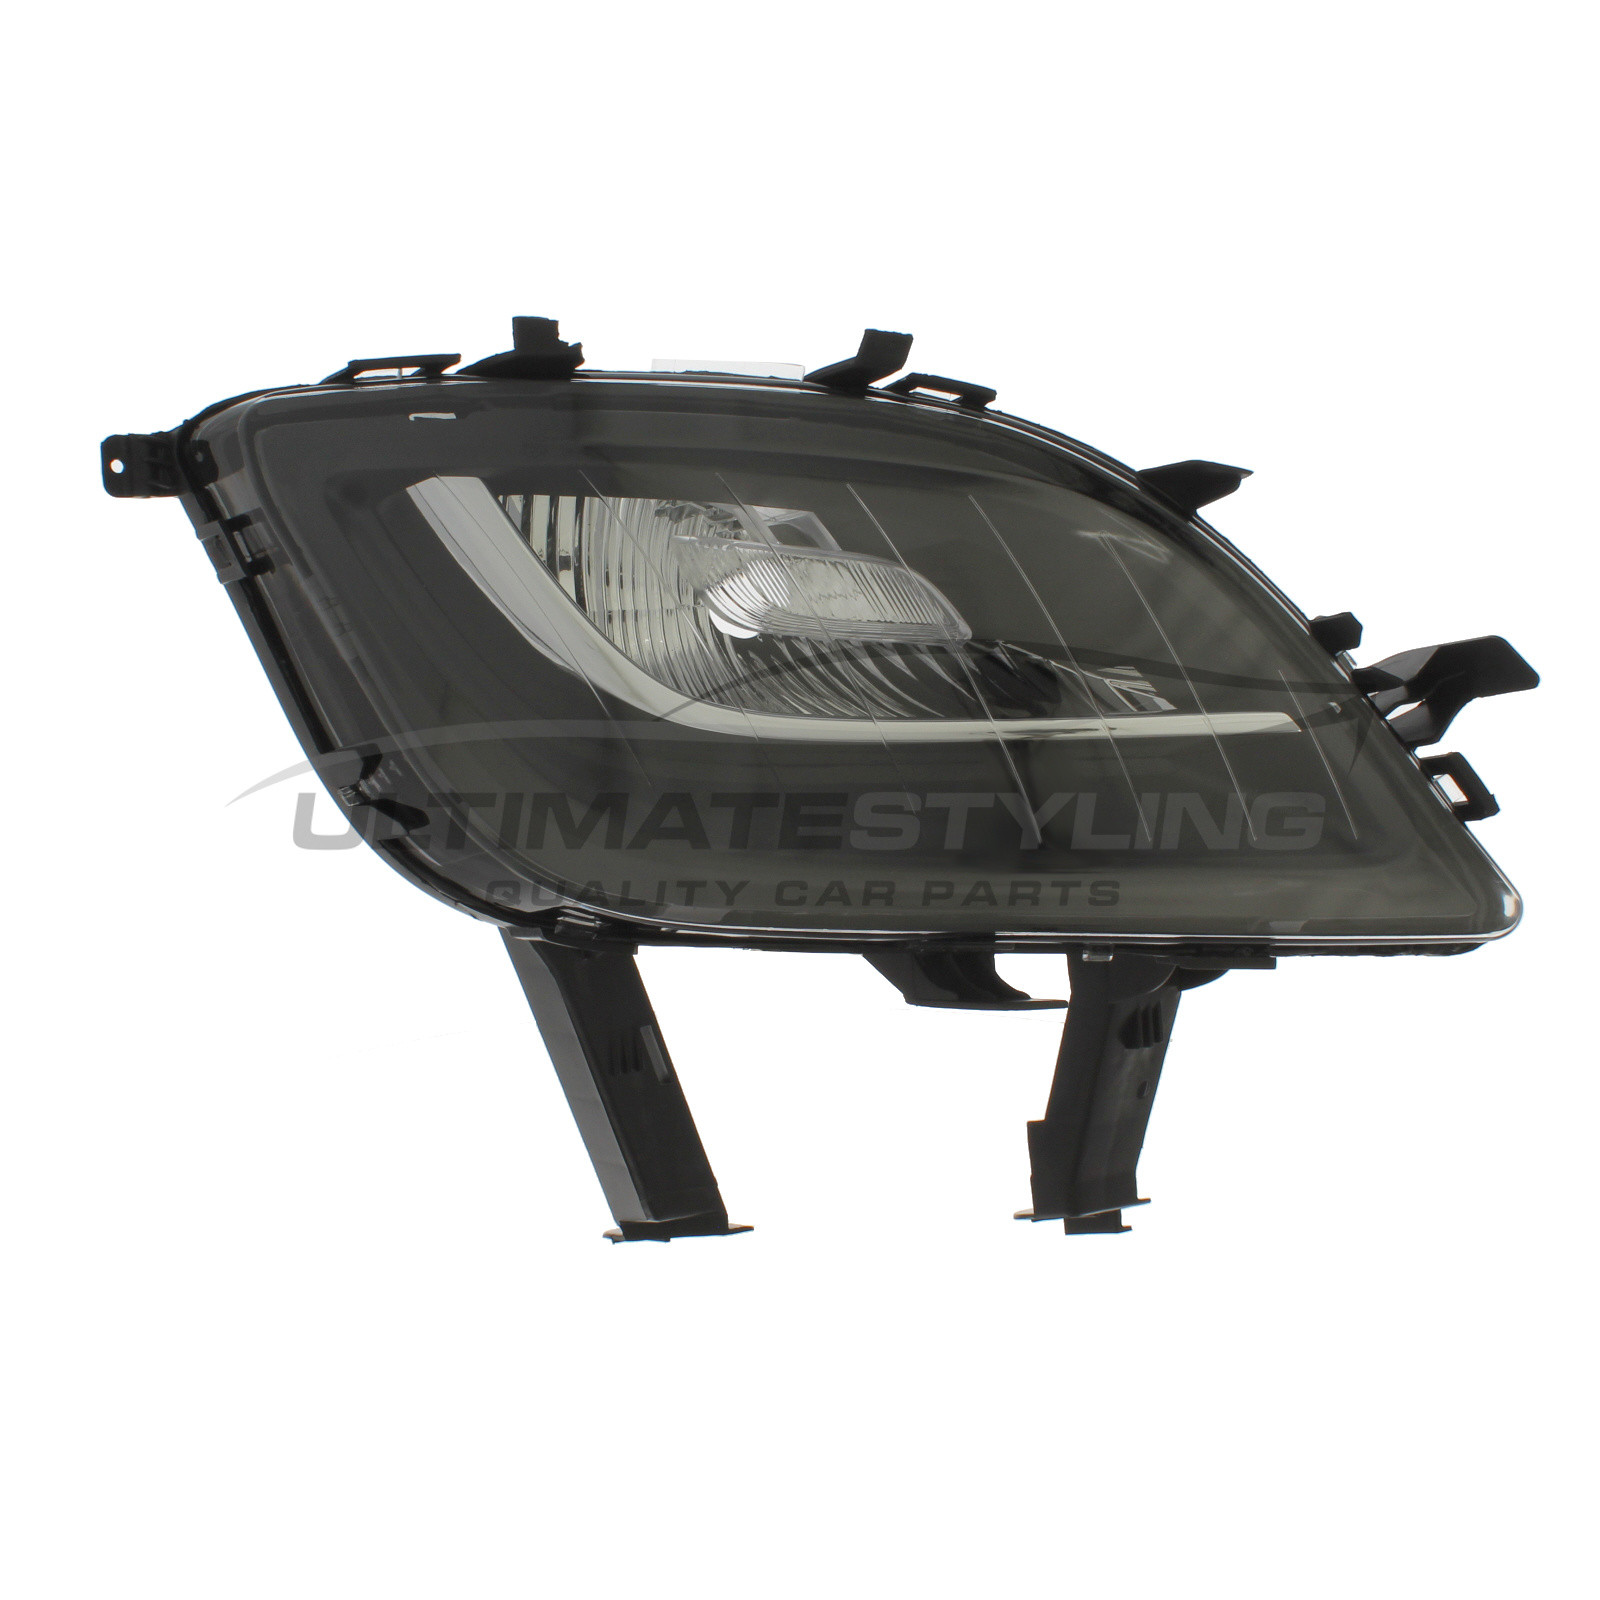 Vauxhall Astra 2009-2012 Black Inner Front Indicator (Excludes Fog Lamp) Excludes Bulb Holder - Drivers Side (RH)